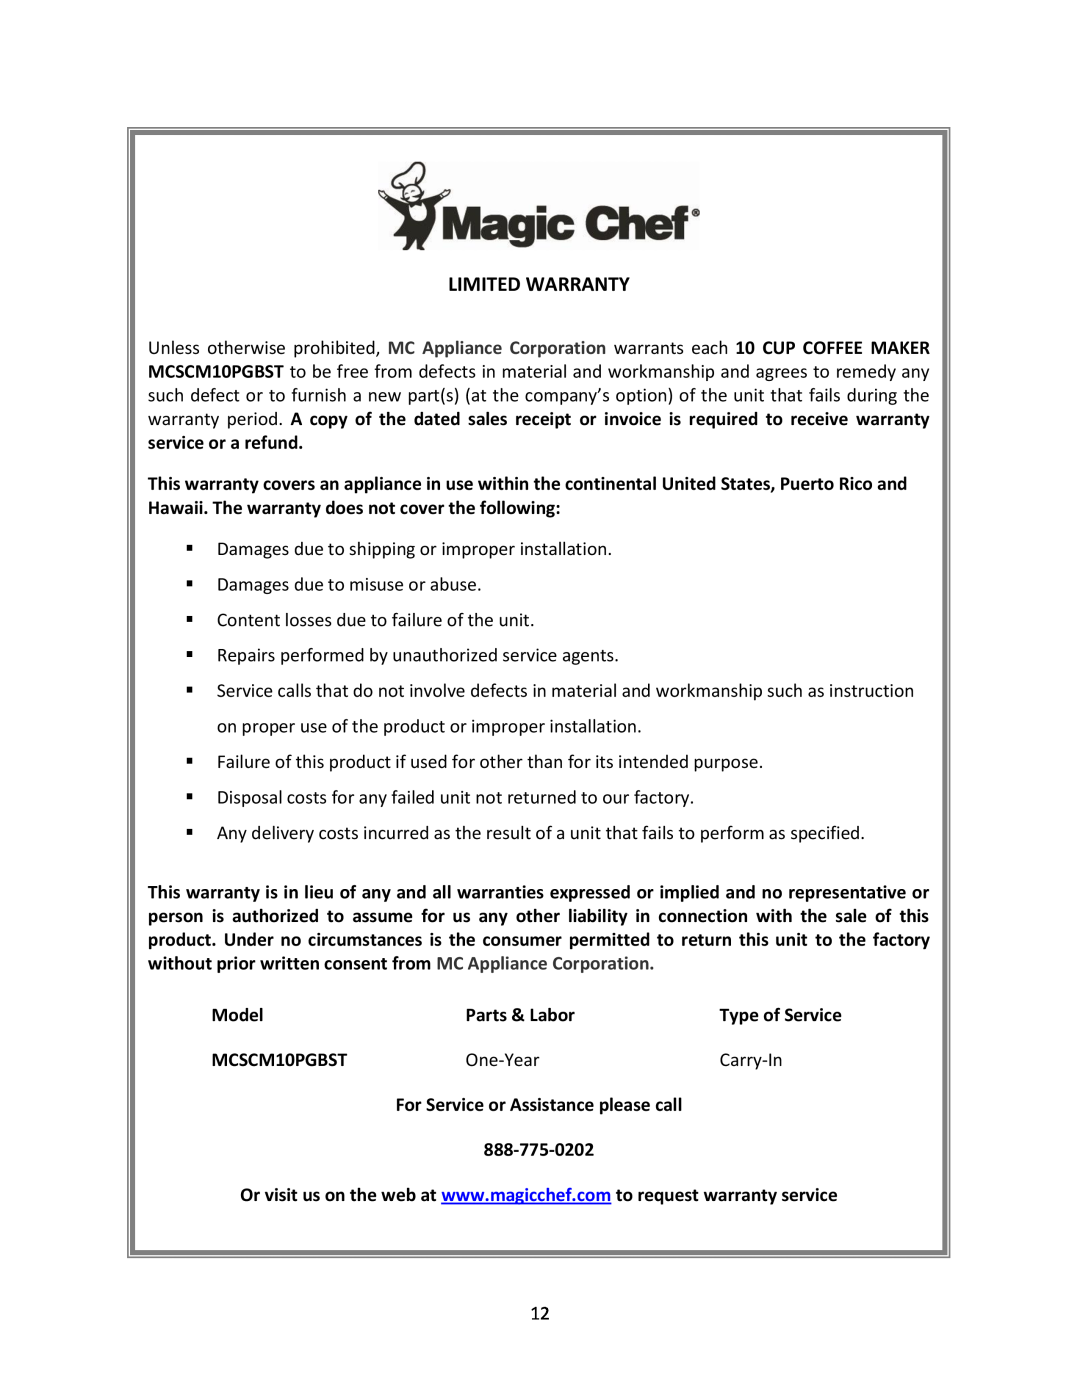 Magic Chef MCSCM10PGBST instruction manual Model, Parts & Labor, One-Year, Carry-In 